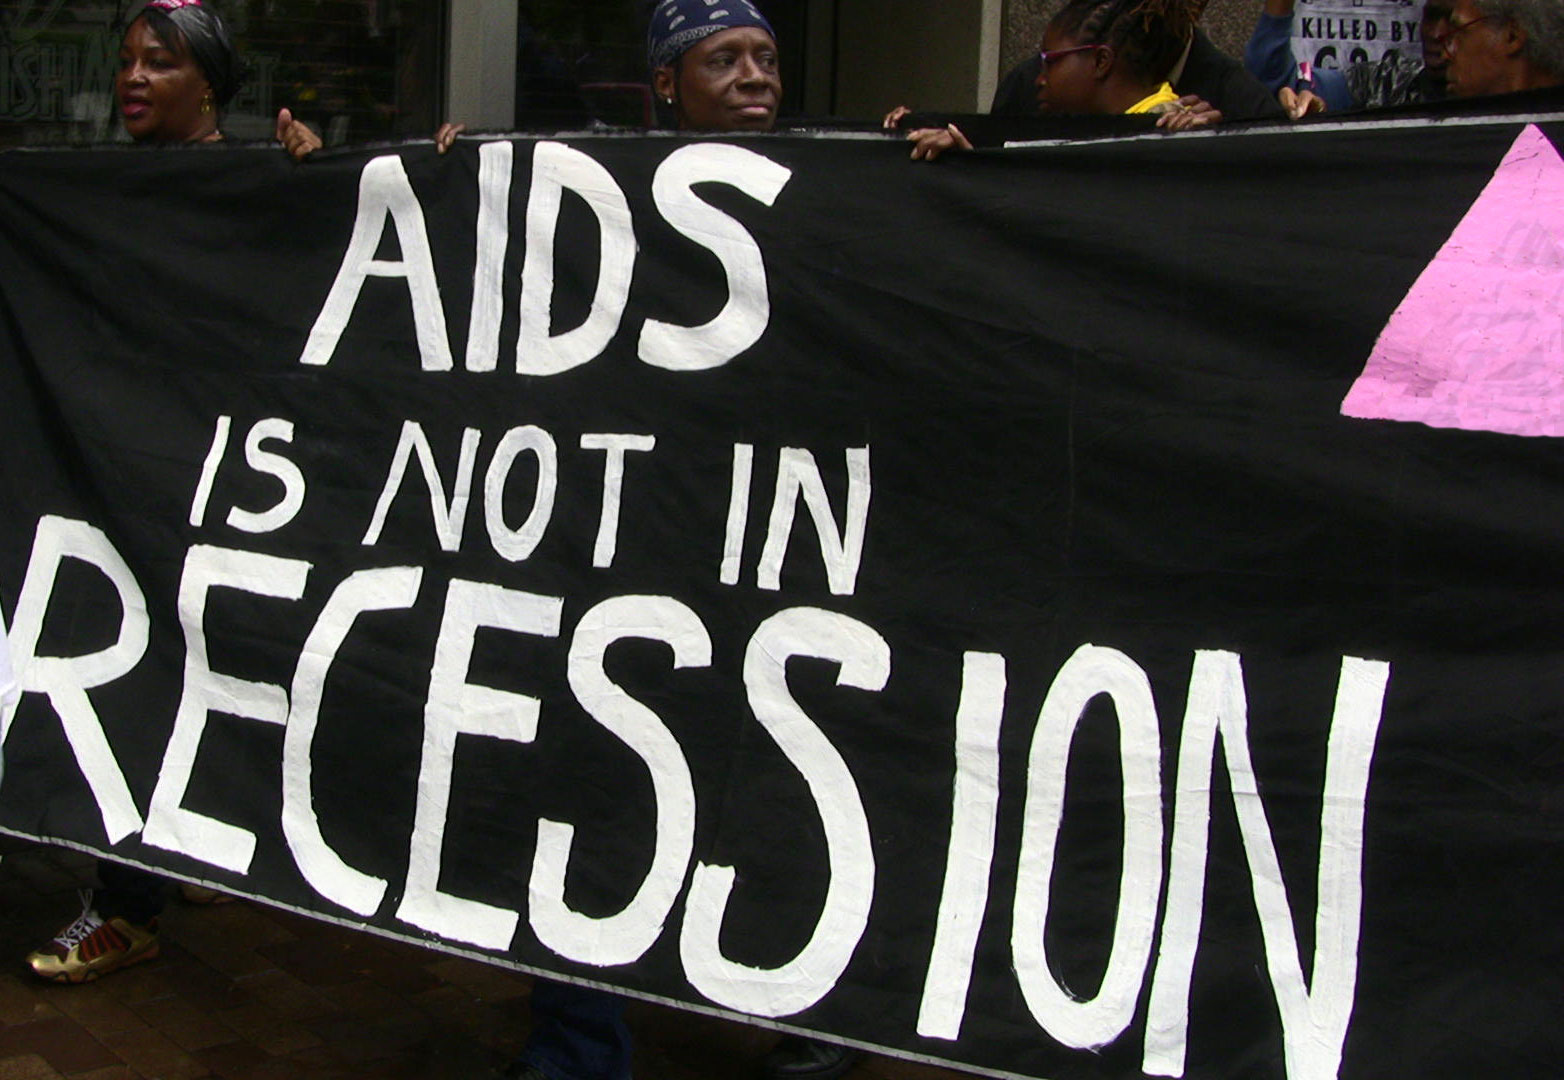 AIDS is not in recession